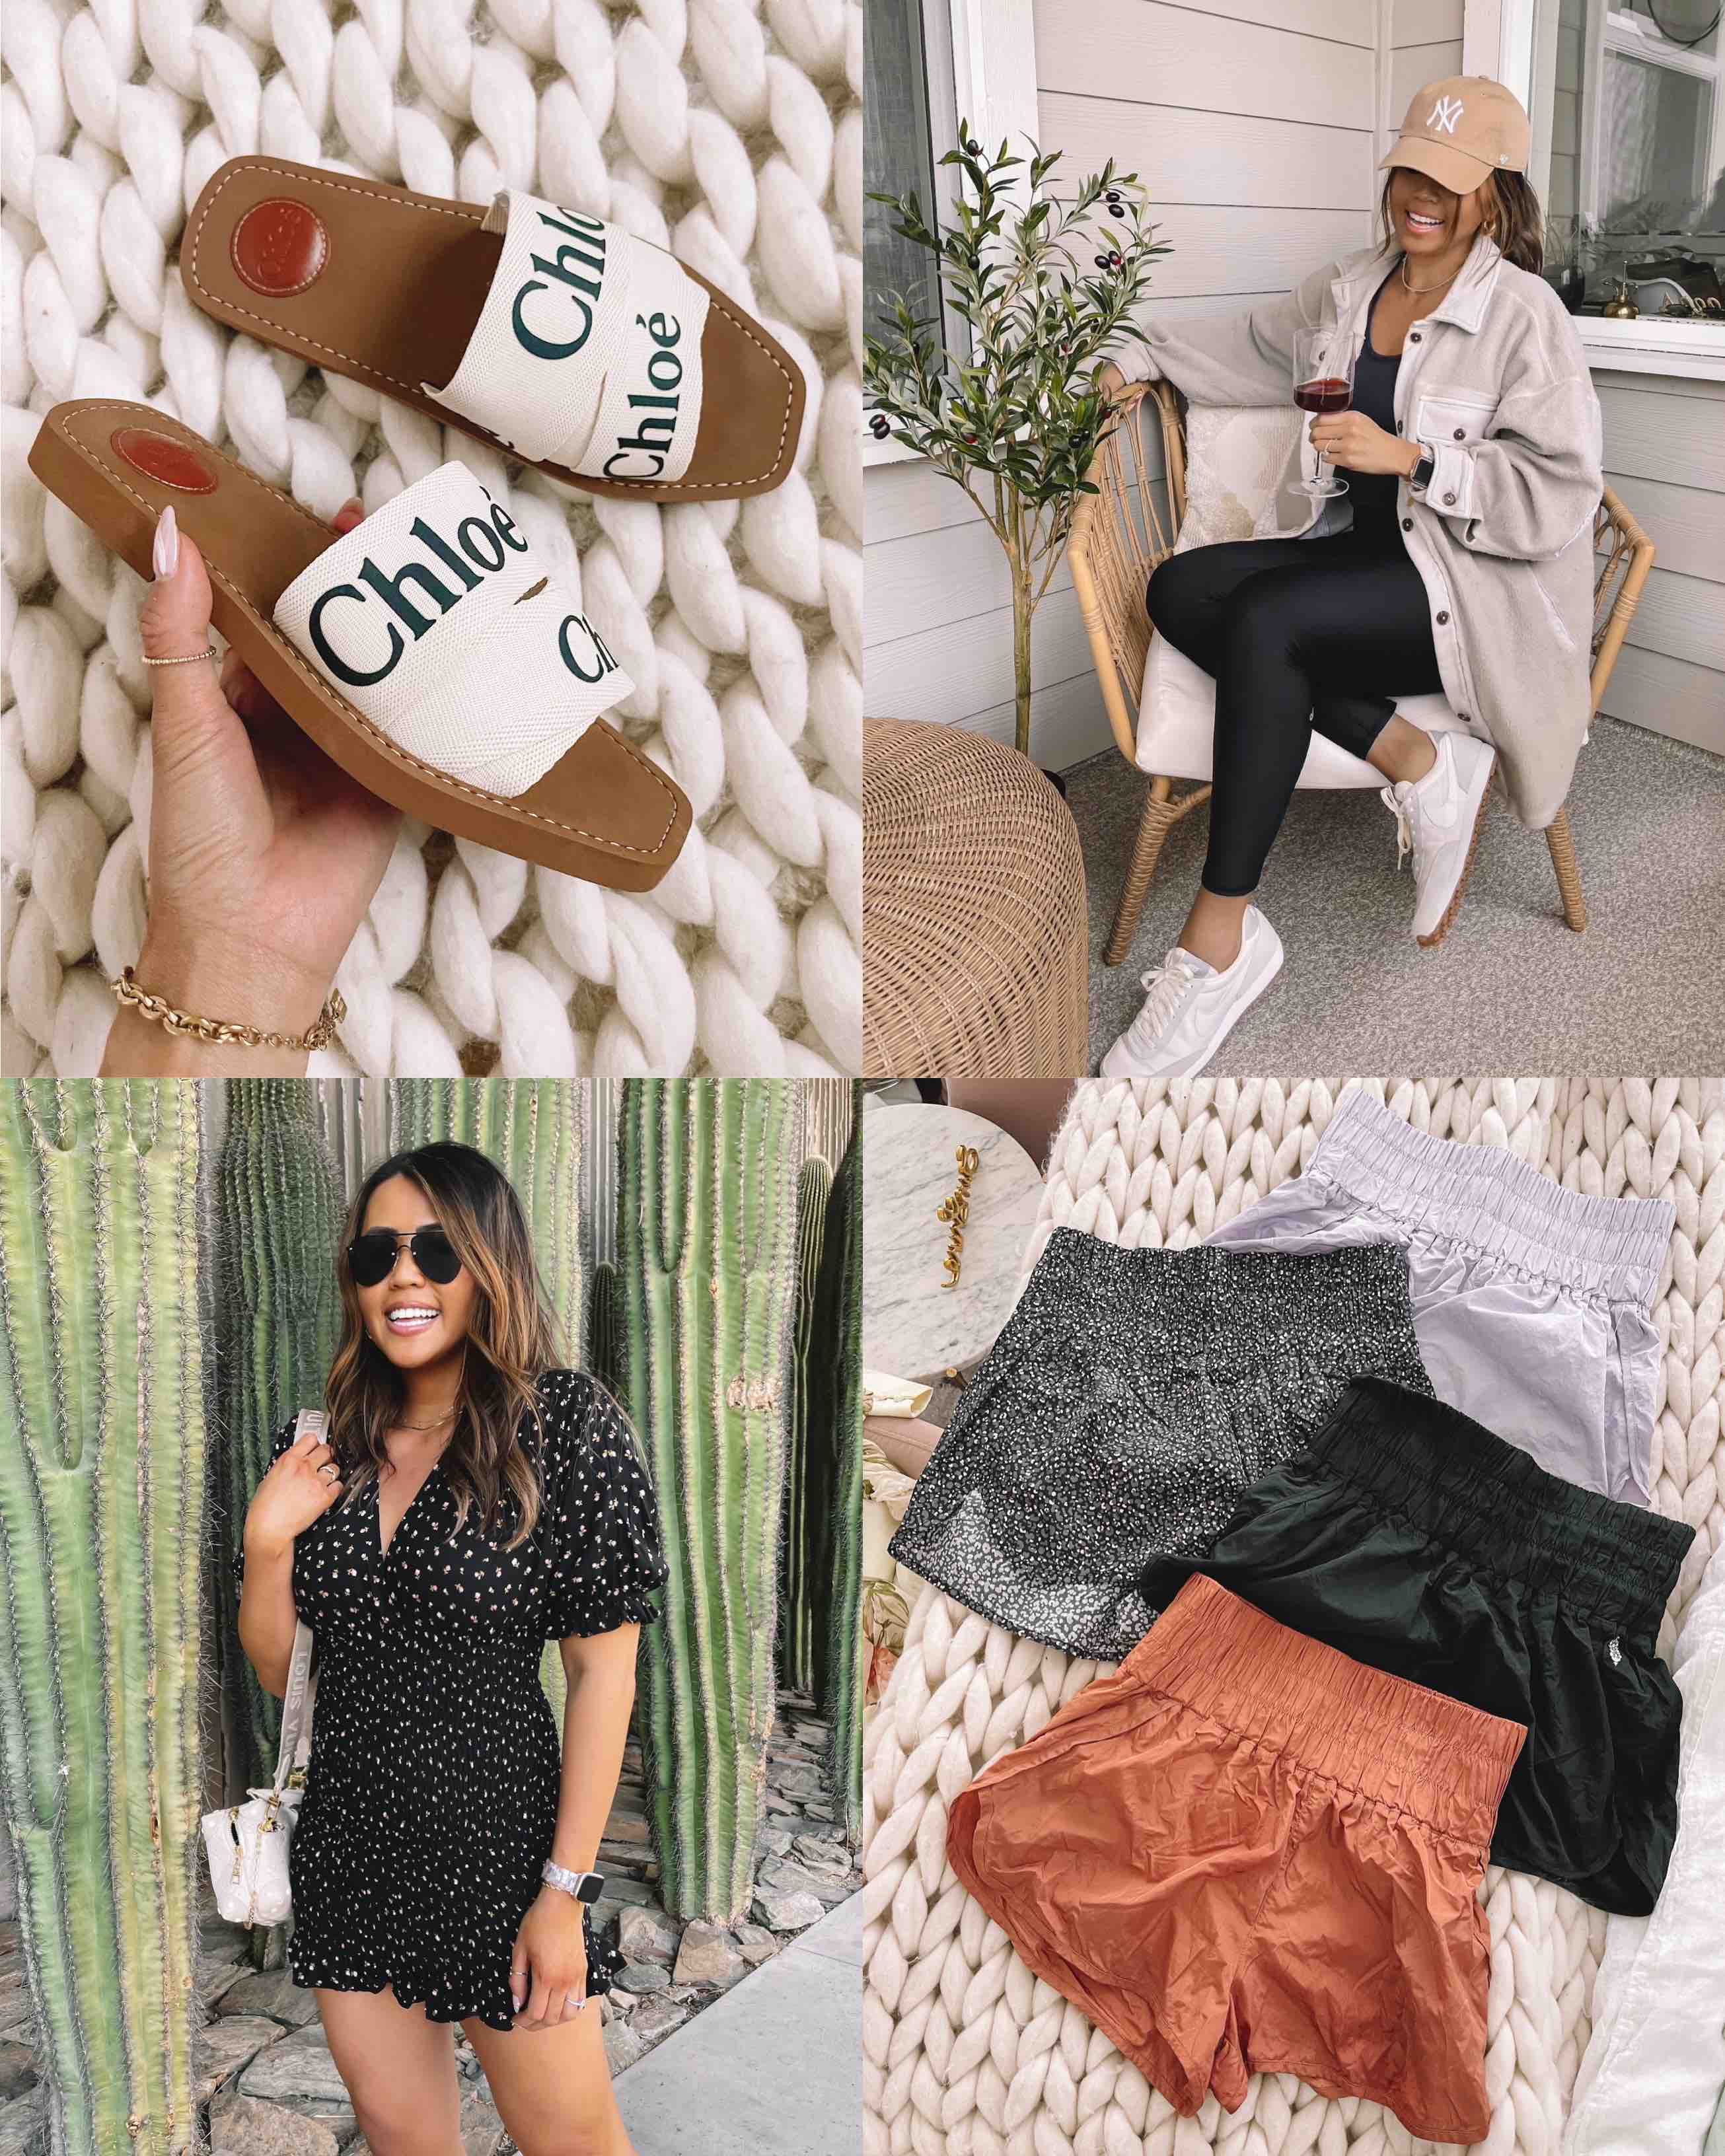 Best Sellers April 2021 - Free People Sale - Best Workout Shorts - Chloe Woody Sandals Review - Nike Air Max 270 Review